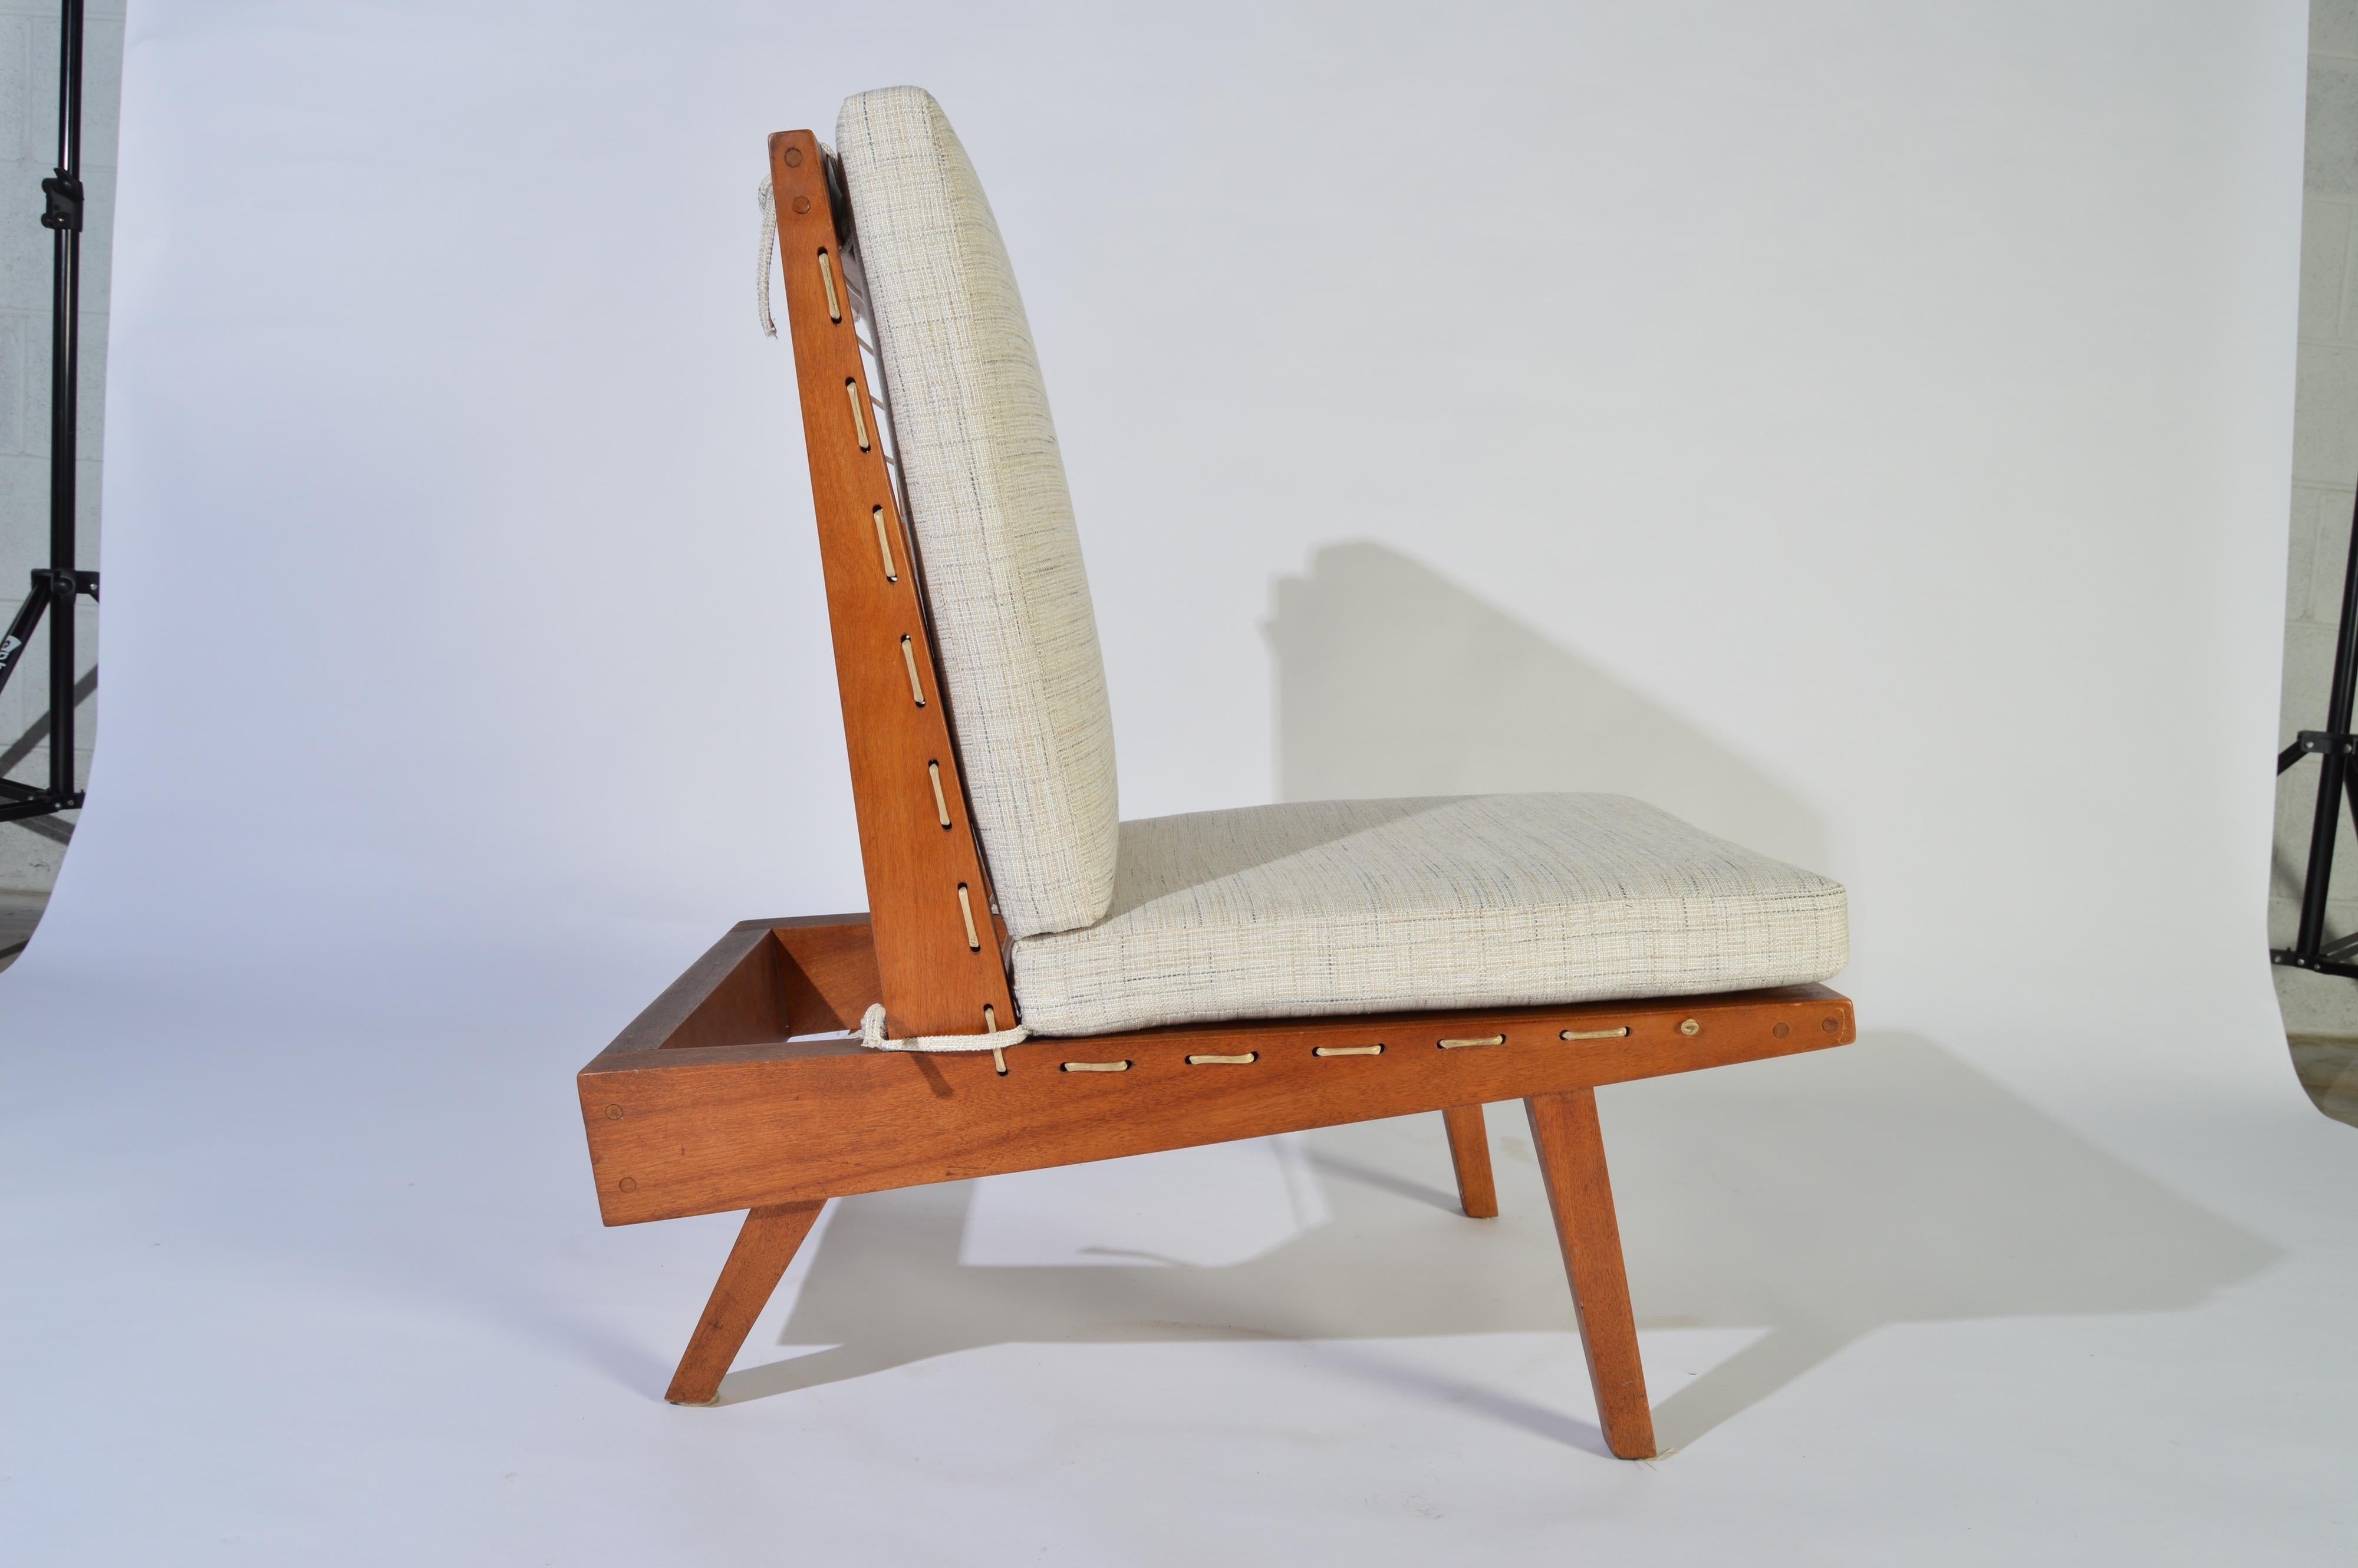 A solid maple easy chair having cable suspension and new tie down cushions in the manner of Riki Watanabe and George Nakashima.
Originally donated to the Swedish Modern Museum where we were fortunate enough to obtain this incredible piece.
Japan